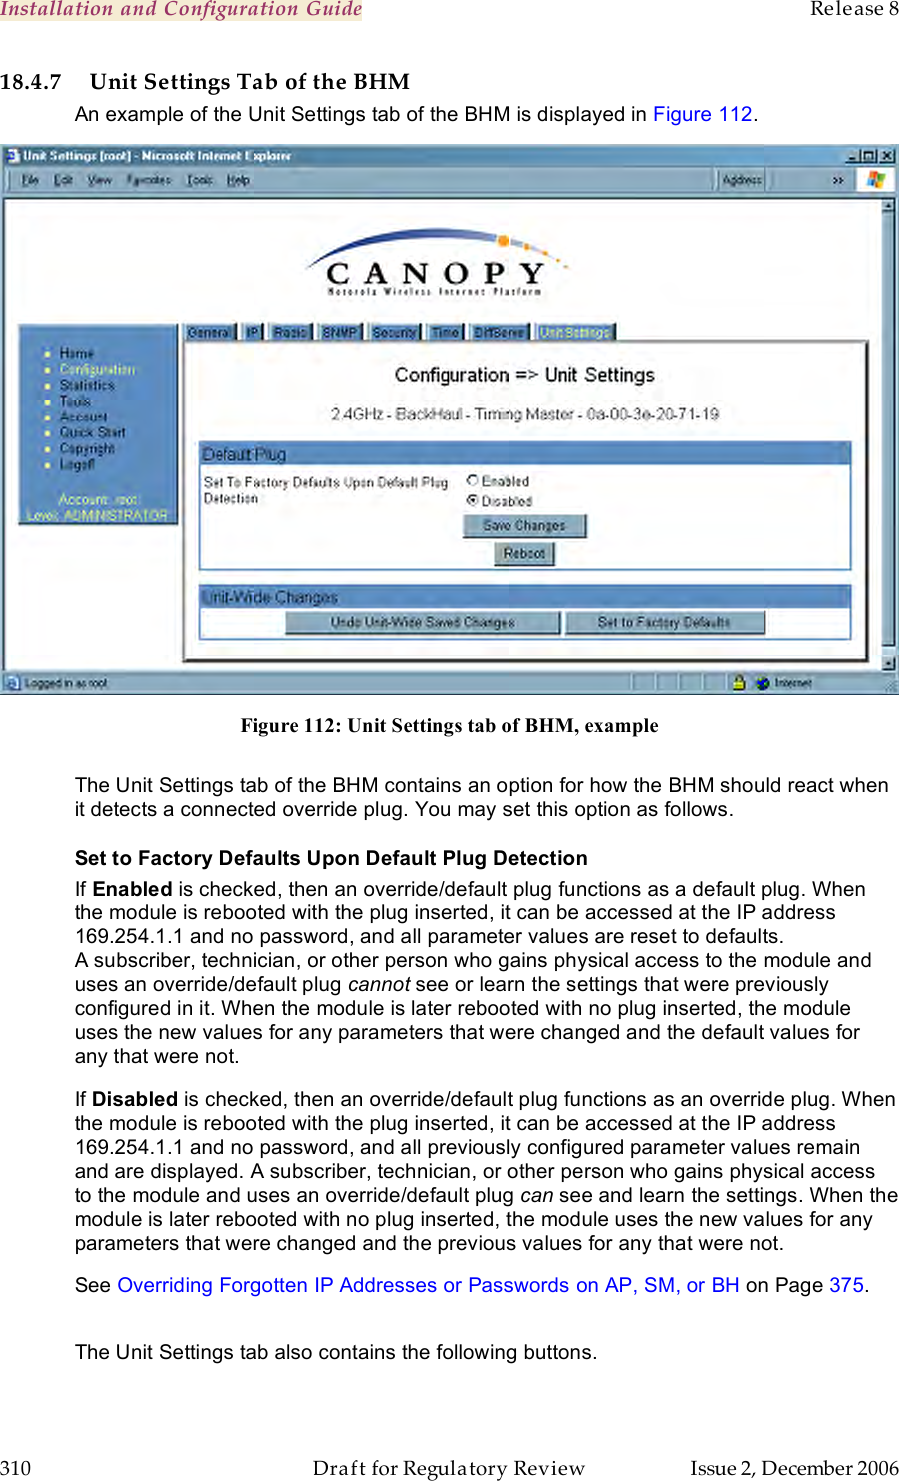 Installation and Configuration Guide    Release 8   310  Draft for Regulatory Review  Issue 2, December 2006 18.4.7 Unit Settings Tab of the BHM An example of the Unit Settings tab of the BHM is displayed in Figure 112.  Figure 112: Unit Settings tab of BHM, example  The Unit Settings tab of the BHM contains an option for how the BHM should react when it detects a connected override plug. You may set this option as follows. Set to Factory Defaults Upon Default Plug Detection If Enabled is checked, then an override/default plug functions as a default plug. When the module is rebooted with the plug inserted, it can be accessed at the IP address 169.254.1.1 and no password, and all parameter values are reset to defaults. A subscriber, technician, or other person who gains physical access to the module and uses an override/default plug cannot see or learn the settings that were previously configured in it. When the module is later rebooted with no plug inserted, the module uses the new values for any parameters that were changed and the default values for any that were not. If Disabled is checked, then an override/default plug functions as an override plug. When the module is rebooted with the plug inserted, it can be accessed at the IP address 169.254.1.1 and no password, and all previously configured parameter values remain and are displayed. A subscriber, technician, or other person who gains physical access to the module and uses an override/default plug can see and learn the settings. When the module is later rebooted with no plug inserted, the module uses the new values for any parameters that were changed and the previous values for any that were not. See Overriding Forgotten IP Addresses or Passwords on AP, SM, or BH on Page 375.  The Unit Settings tab also contains the following buttons. 